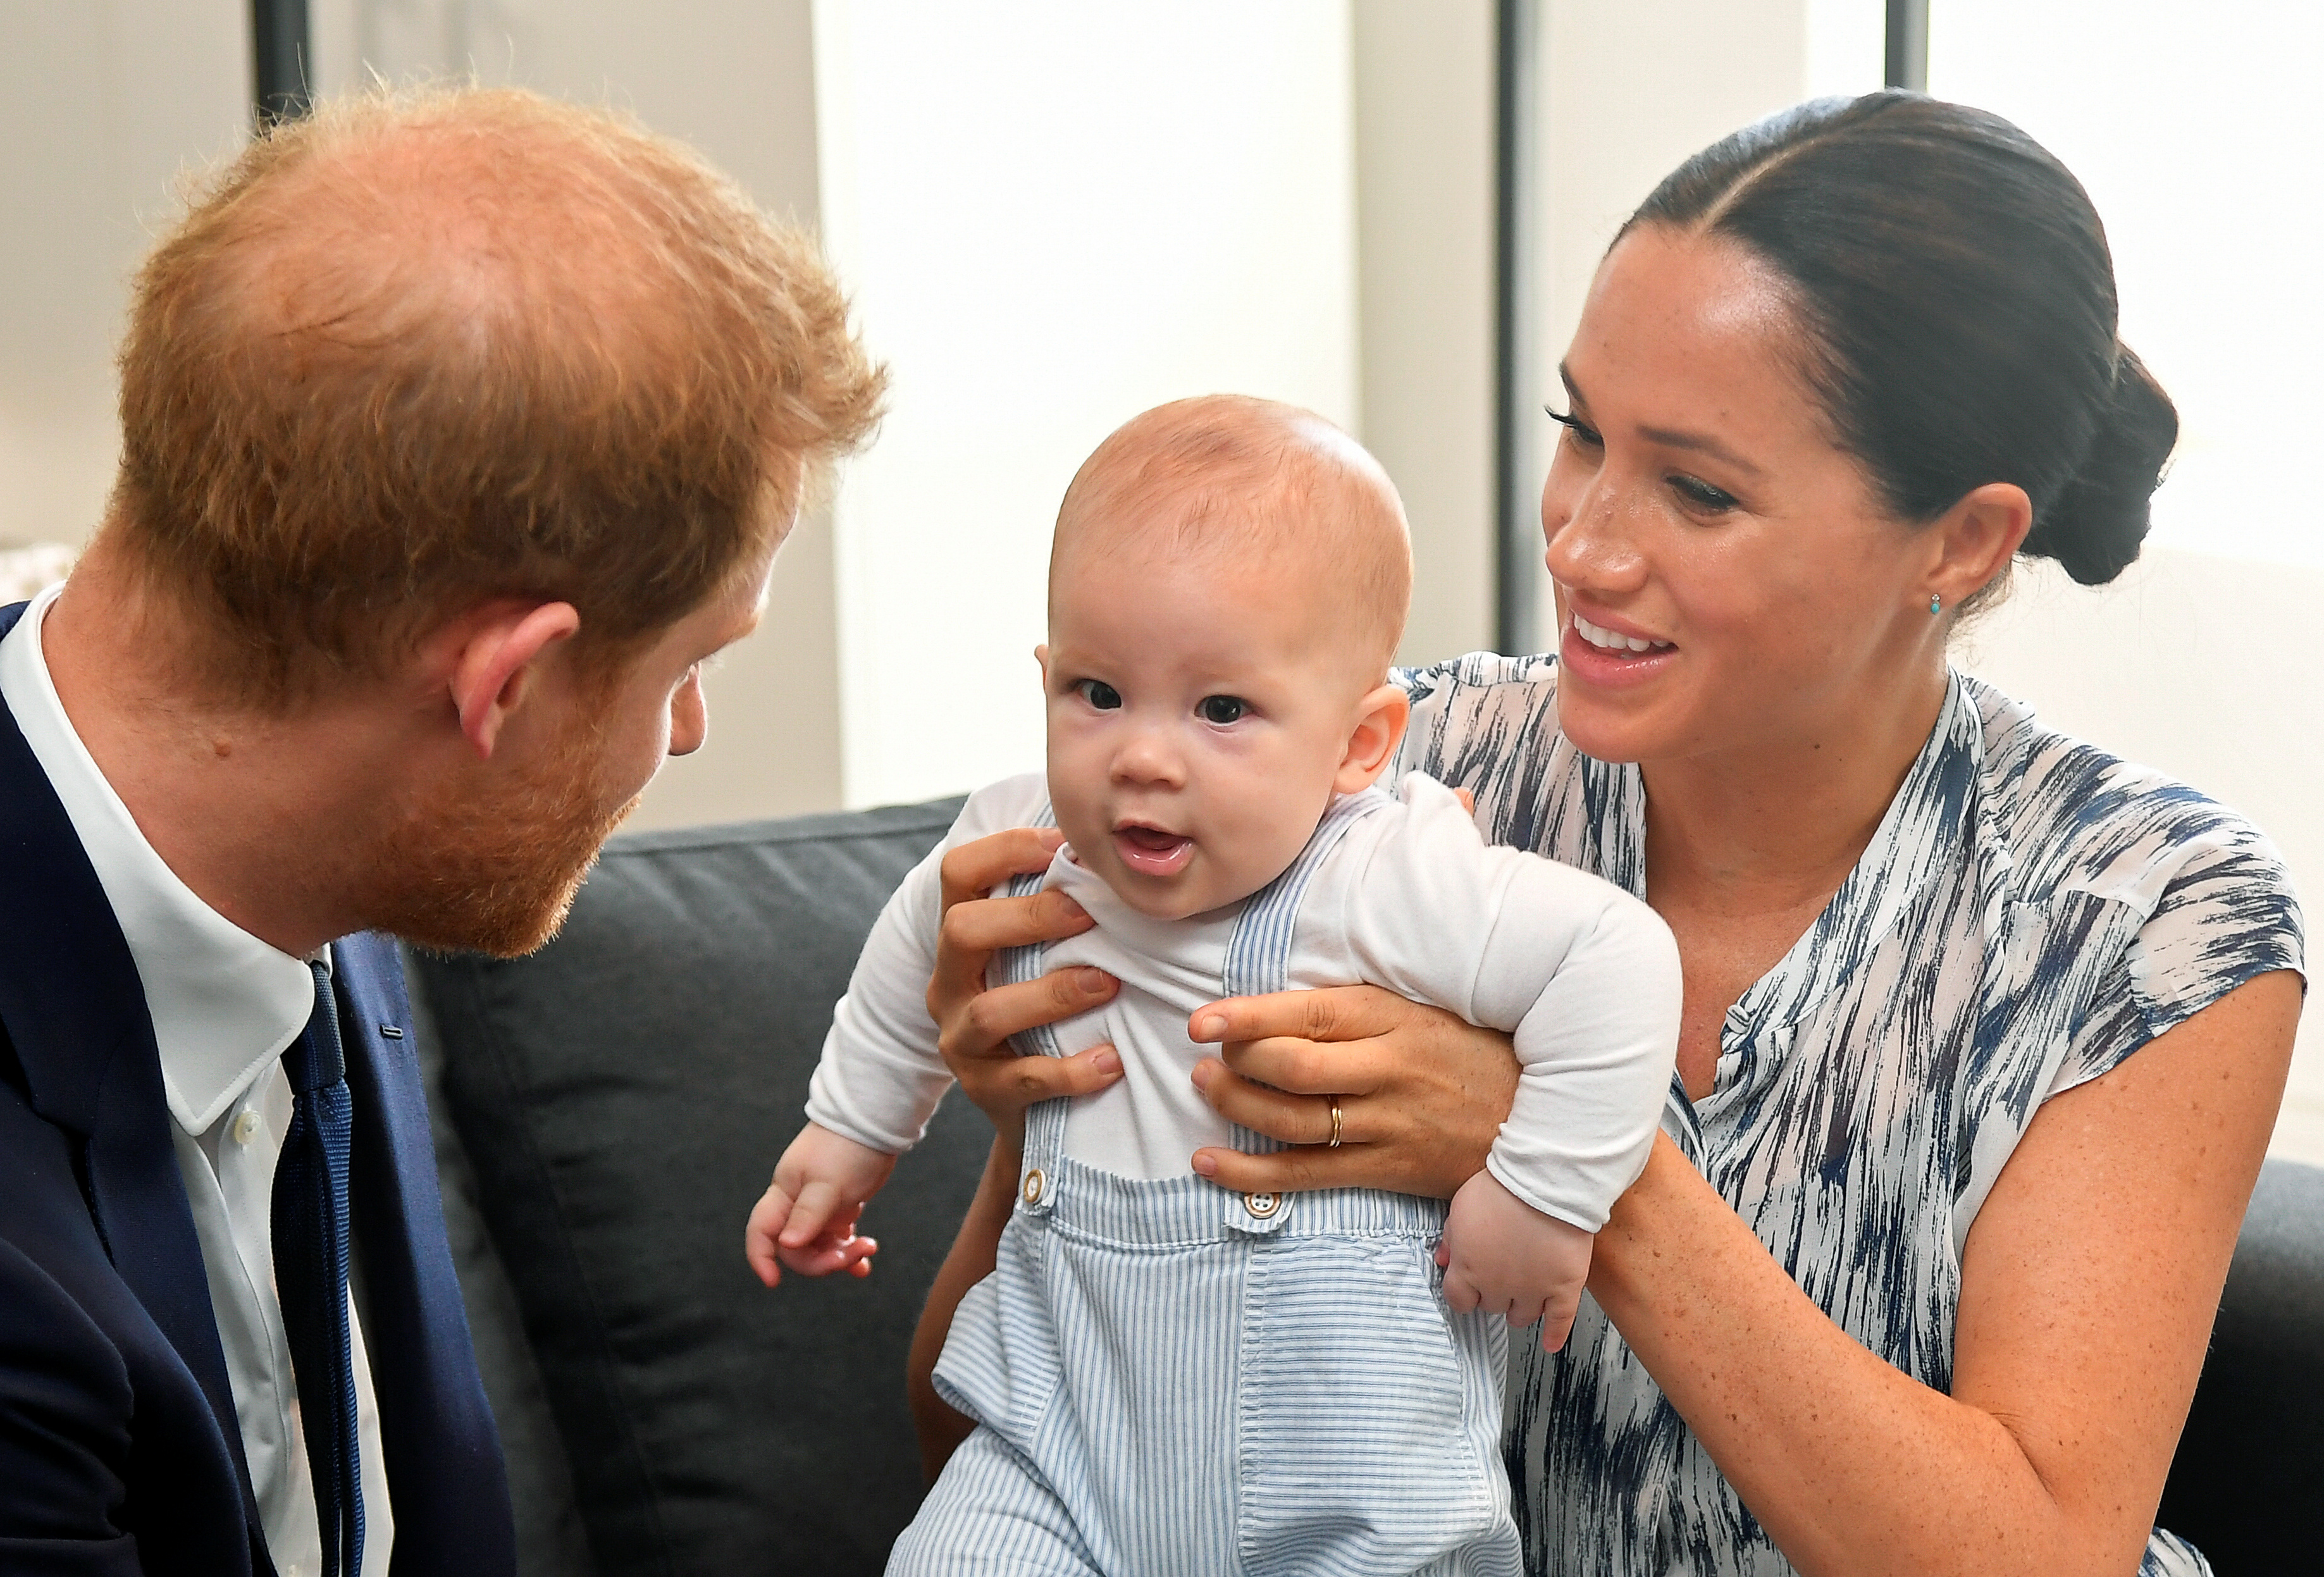 Prince Harry looks at Archie as his wife Meghan Markle holds their son at the Desmond & Leah Tutu Legacy Foundation, on September 25, 2019, in Cape Town, South Africa. | Source: Getty Images